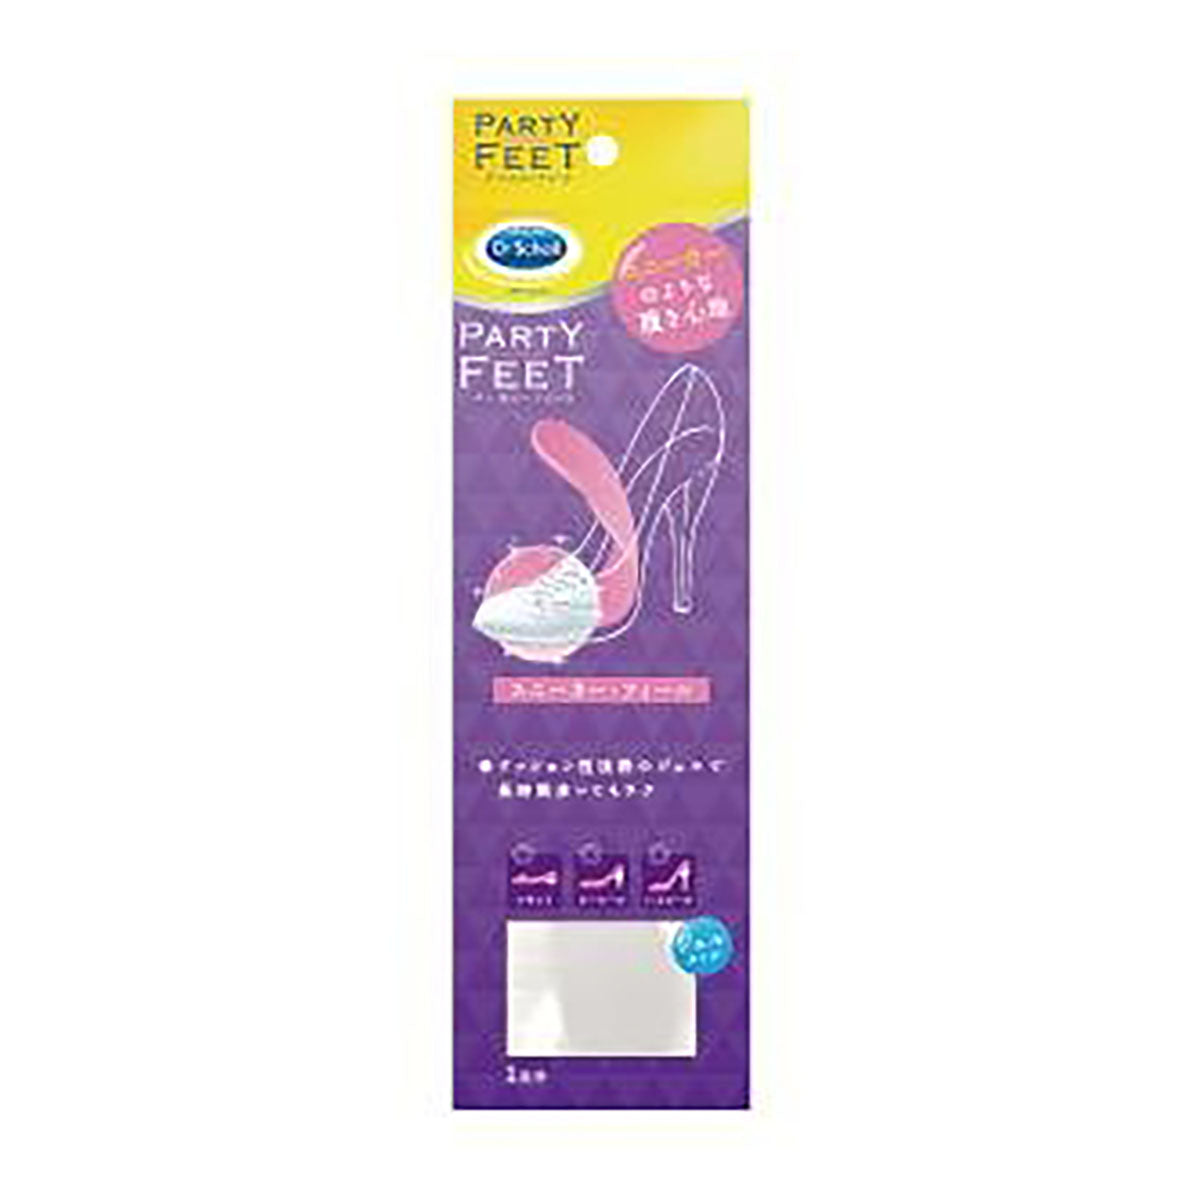 Dr Scholl PARTY FEET 高跟鞋墊 (足弓加厚款)(女士款)